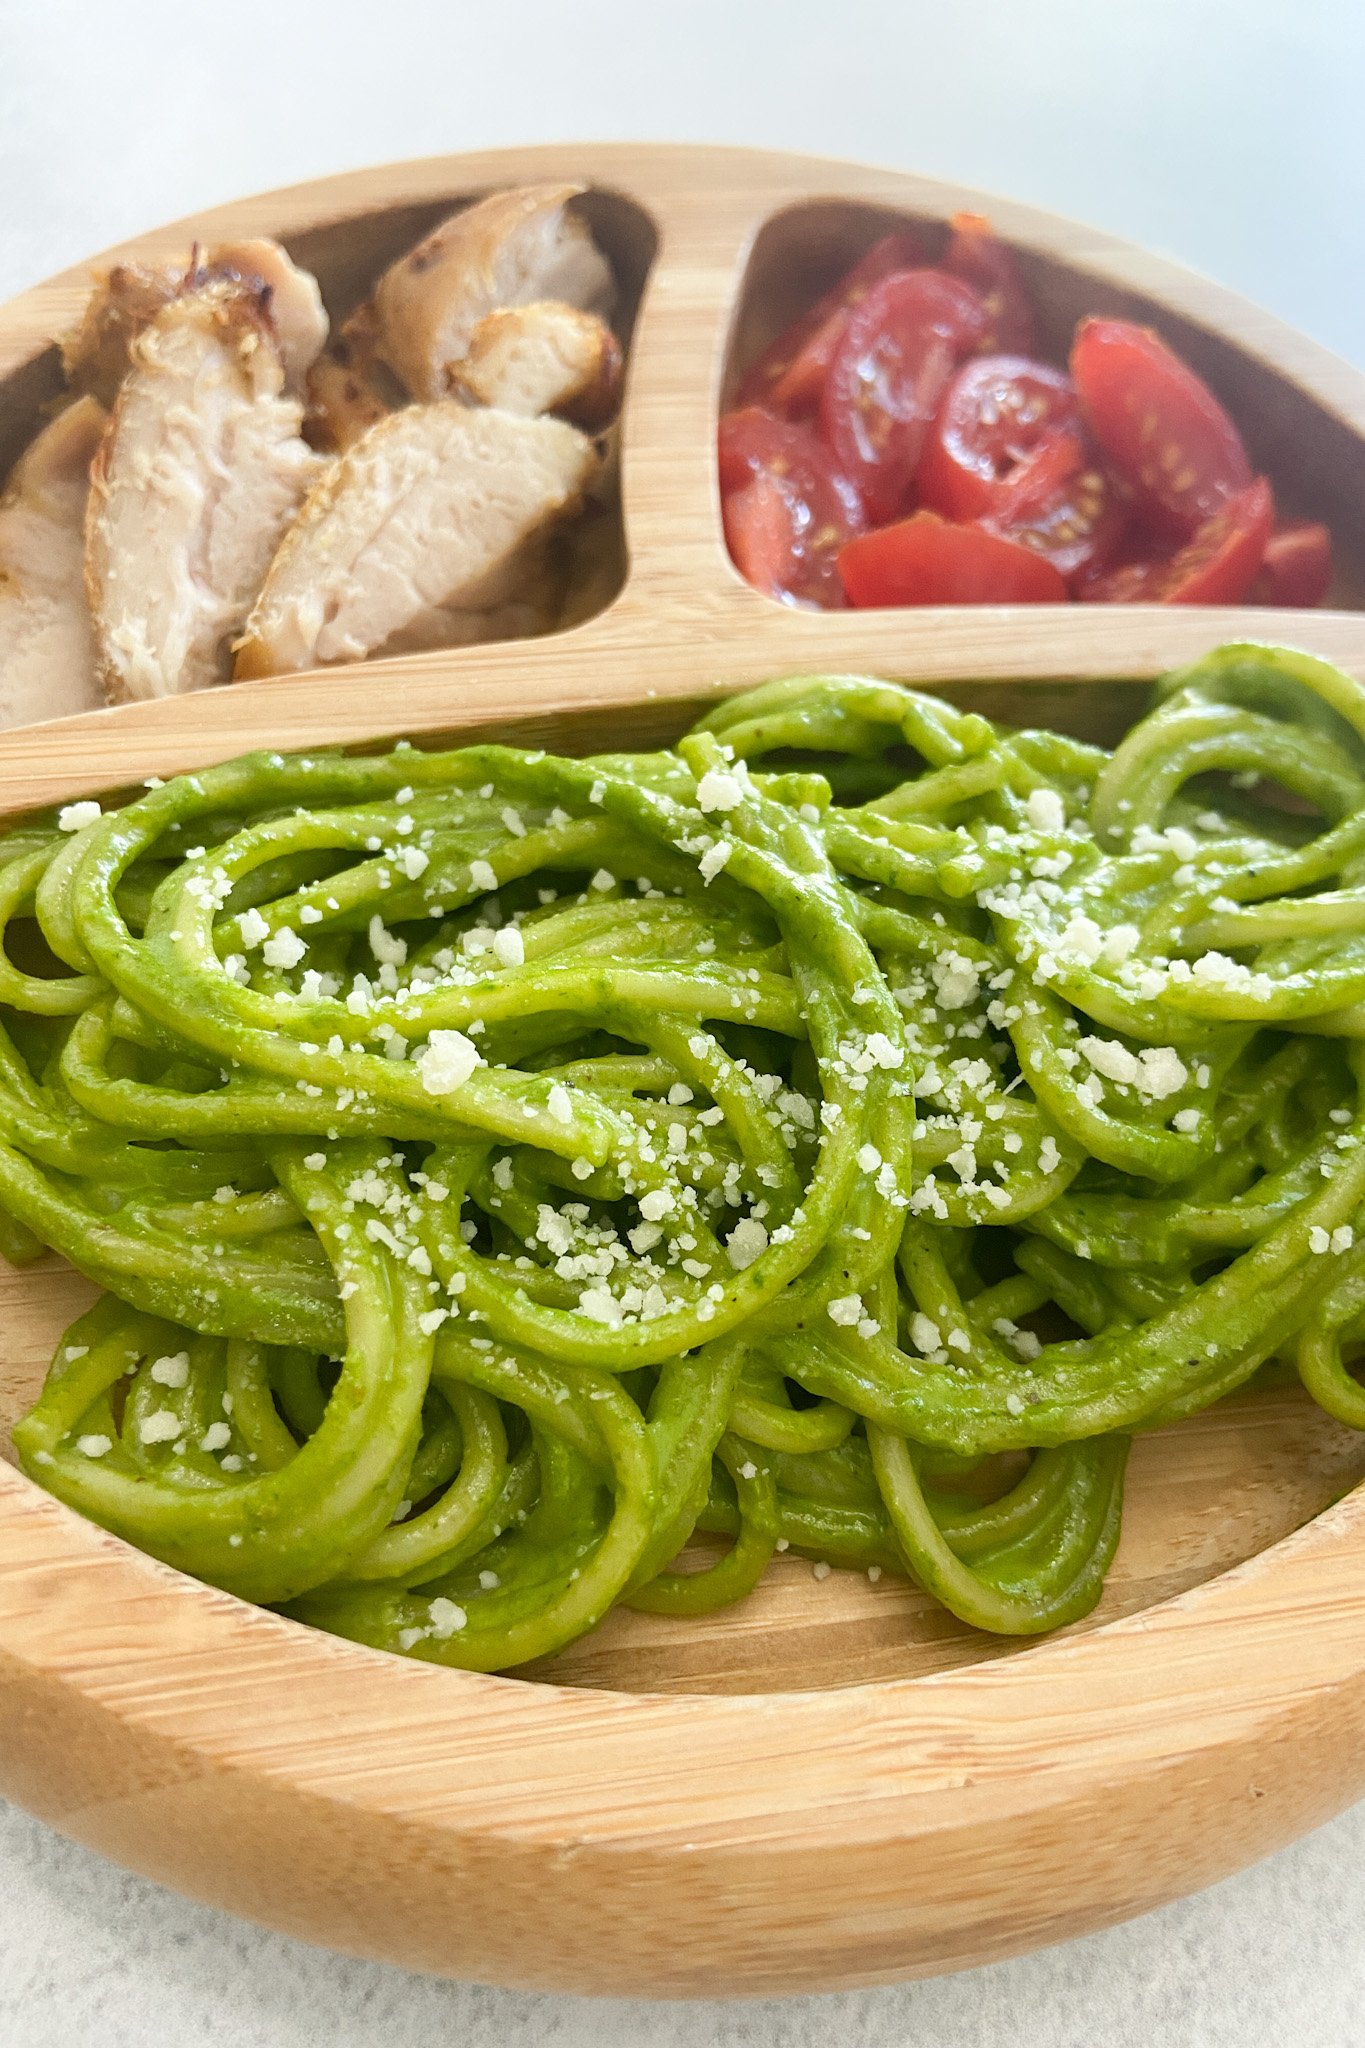 Hulk pasta served with tomatoes and chicken